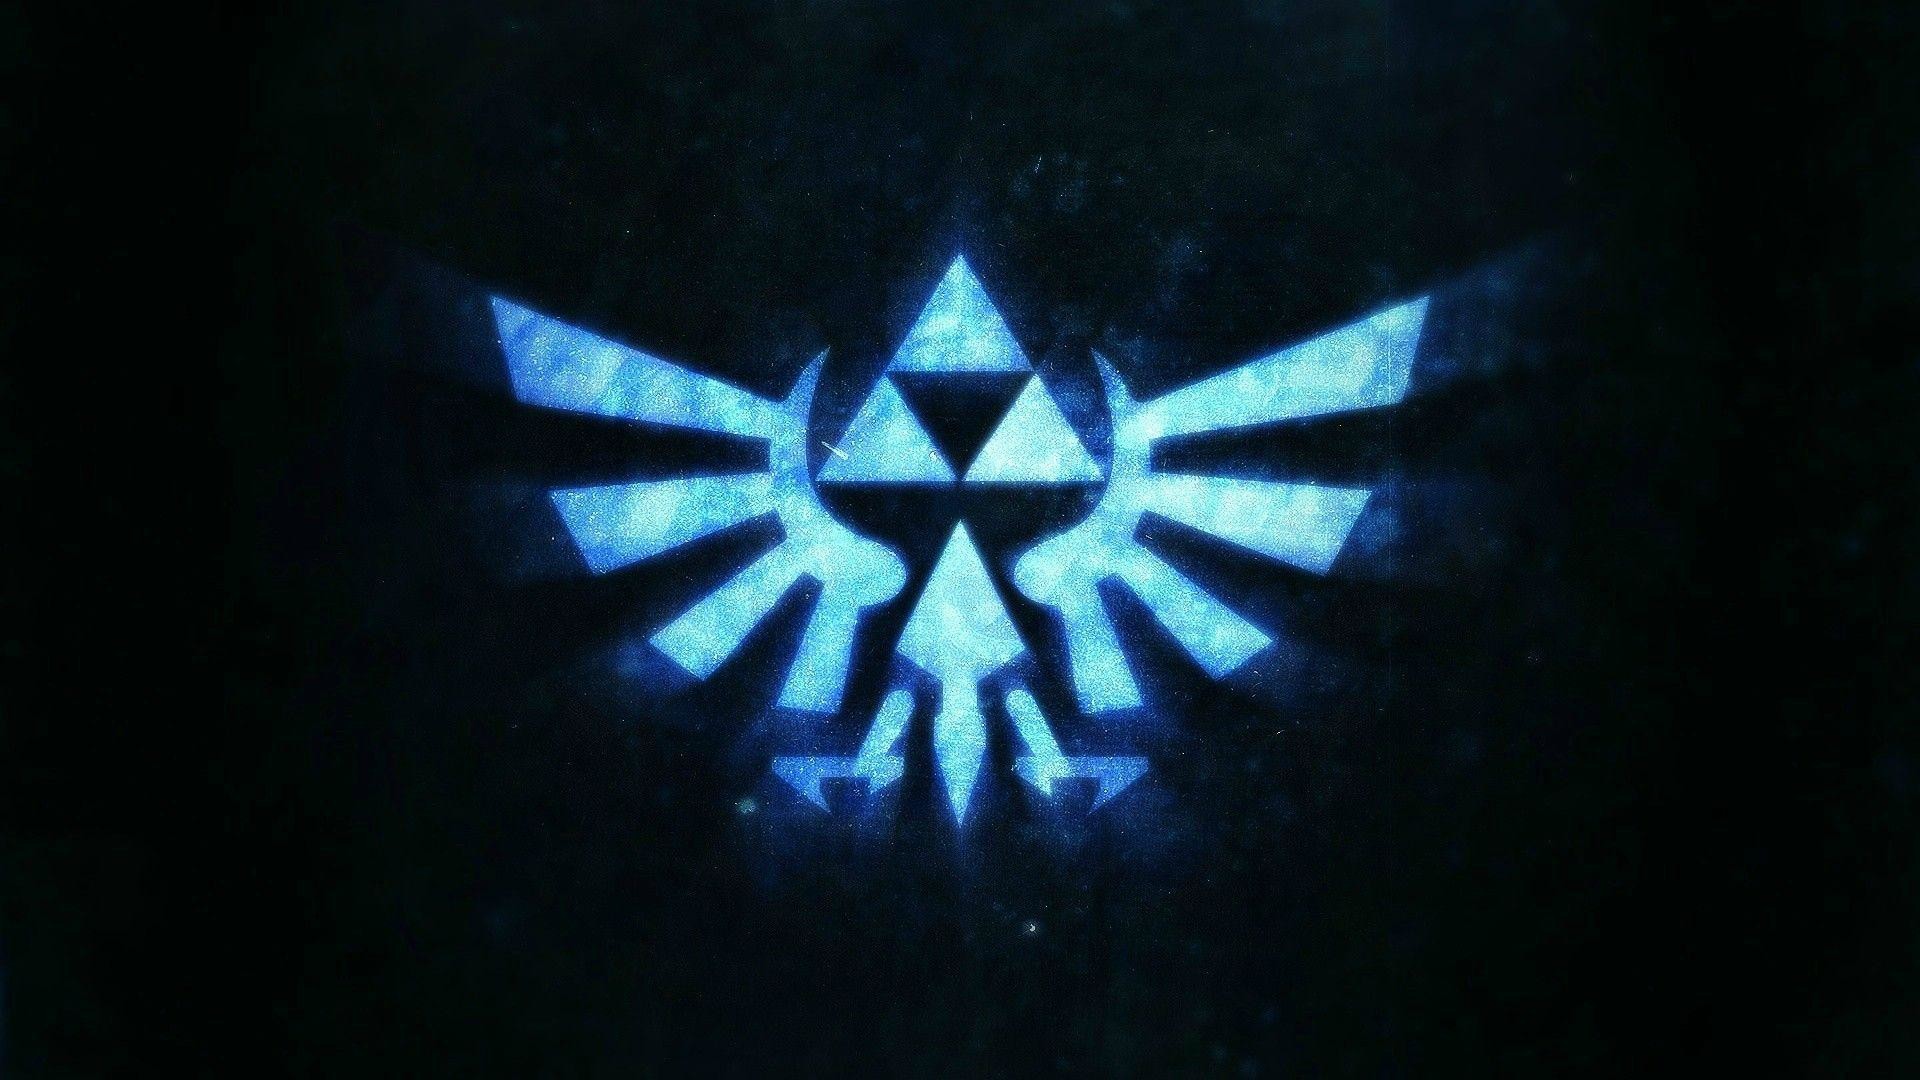 1920x1080 Gaming wallpaper games triforce - BC-GB - Be Entertained by Our .